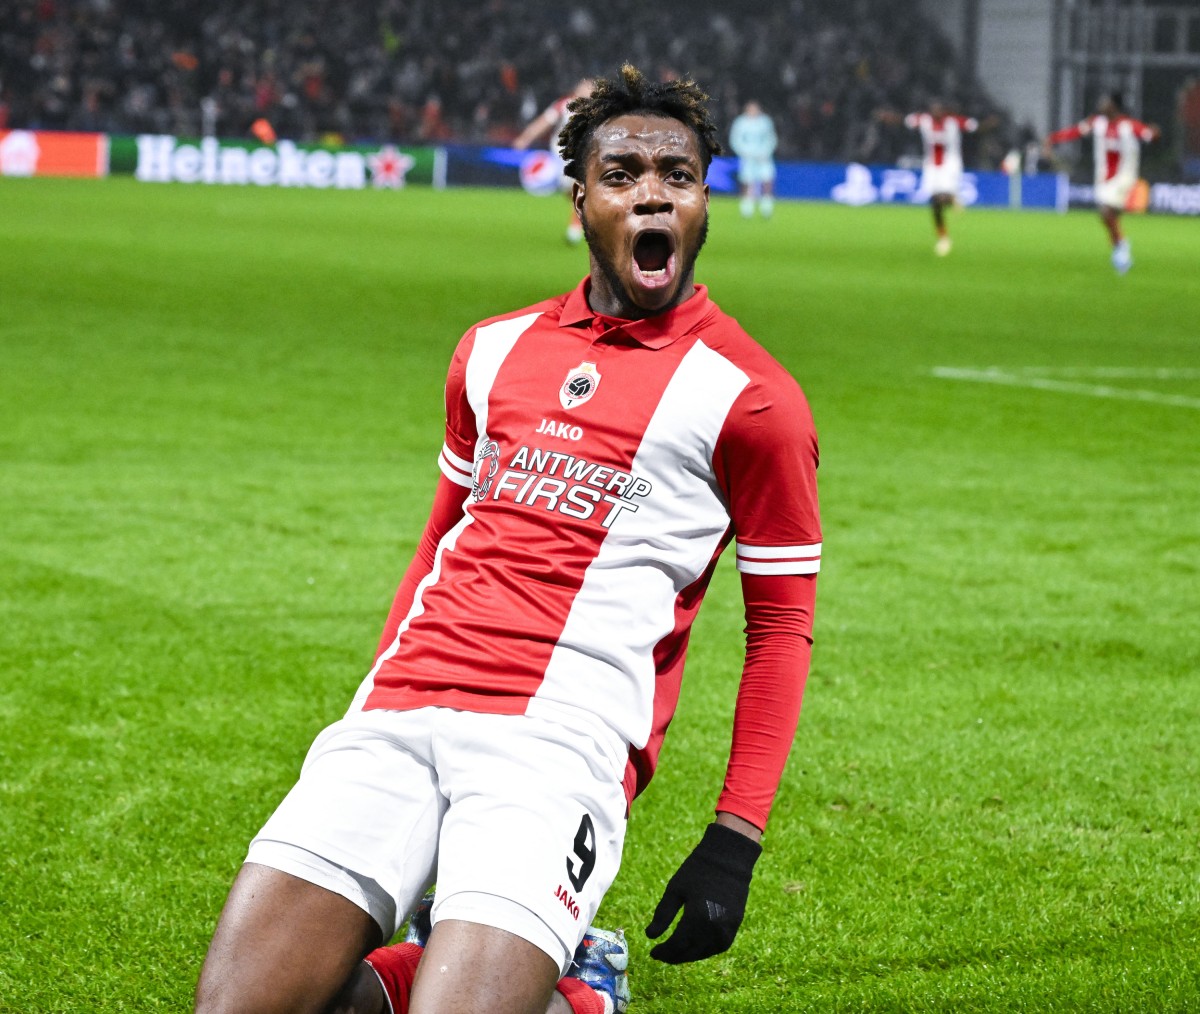 9 goals in all comps w/avg of 30-ish mins per game (7 starts) is stellar for a 17 year old! royal antwerp's george ilenikhena could be the next great young striker! bonus: he's a massive manchester united fan! get it done! #mufc #PremierLeague #AntwerpFirst